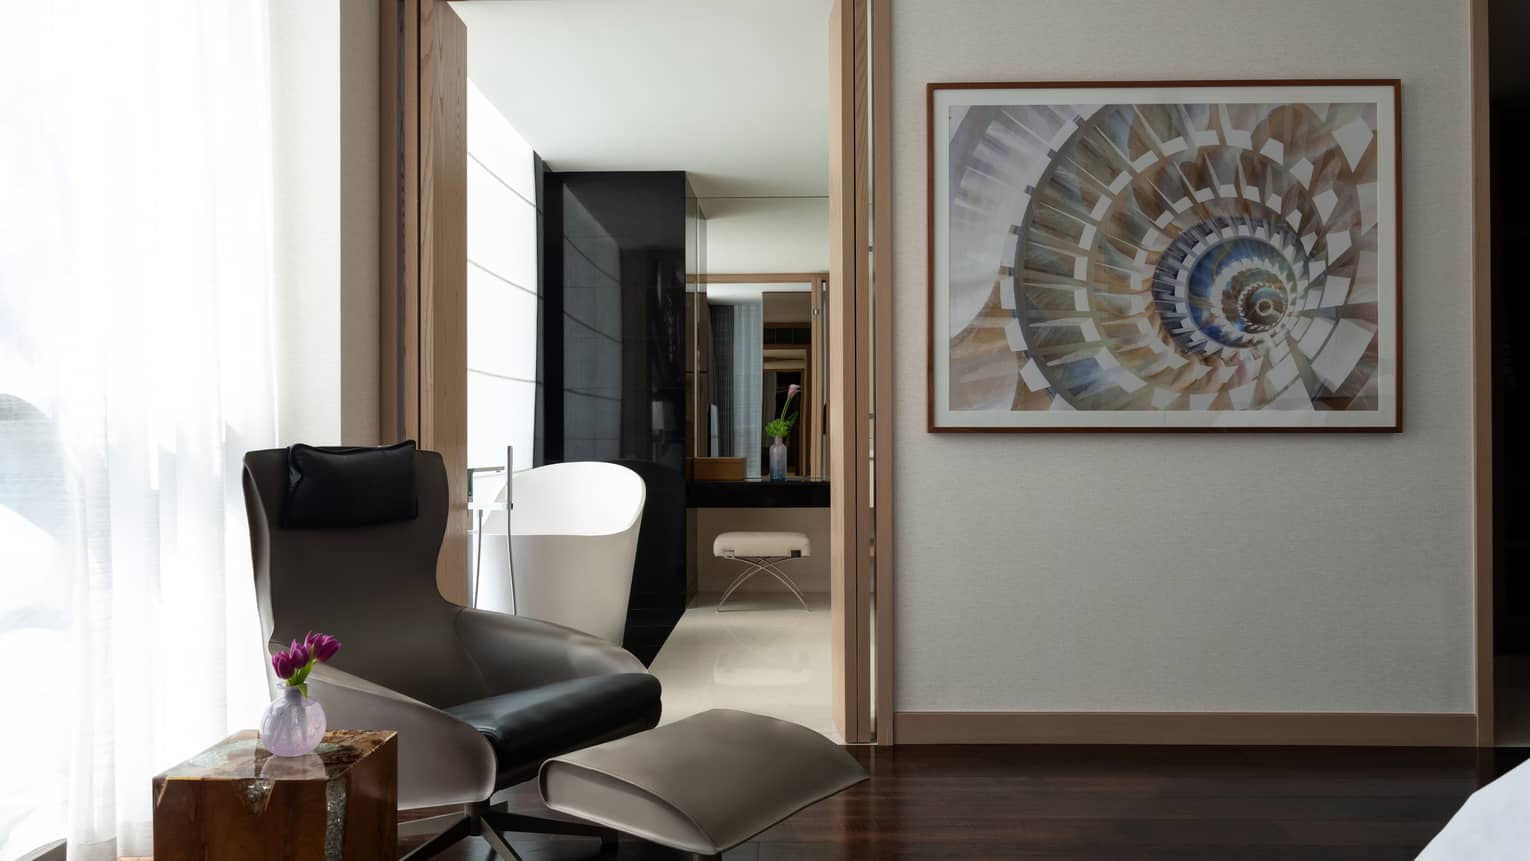 Black arm chair and ottoman in the corner of a room, artwork on wall